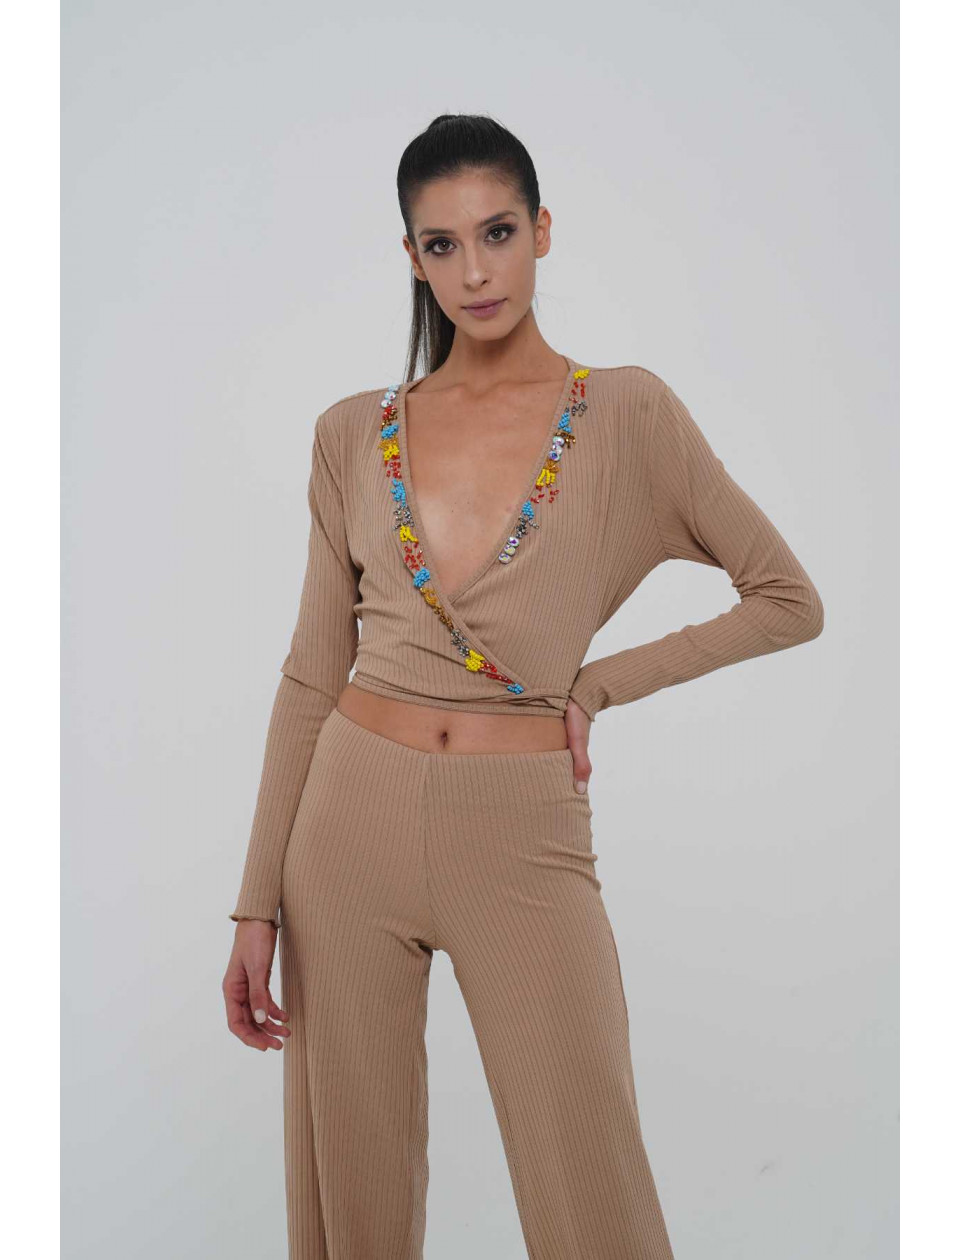 BEADED TROUSERS TOP SET